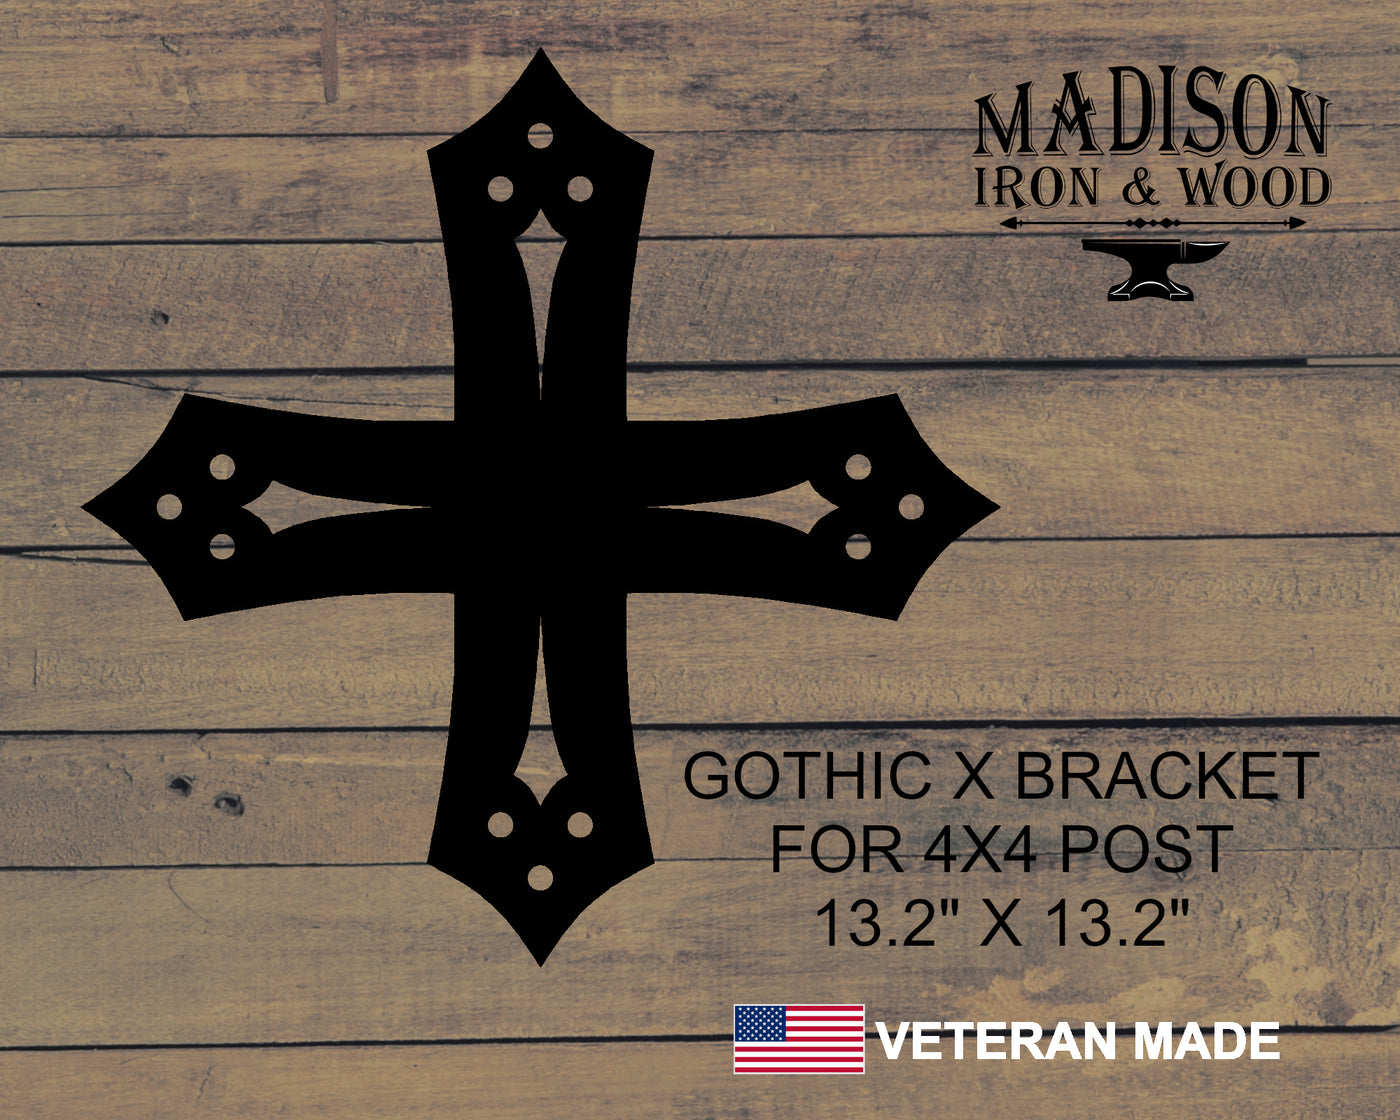 Gothic Brackets For 4x4 Dimensional Lumber - Madison Iron and Wood - Brackets - metal outdoor decor - Steel deocrations - american made products - veteran owned business products - fencing decorations - fencing supplies - custom wall decorations - personalized wall signs - steel - decorative post caps - steel post caps - metal post caps - brackets - structural brackets - home improvement - easter - easter decorations - easter gift - easter yard decor